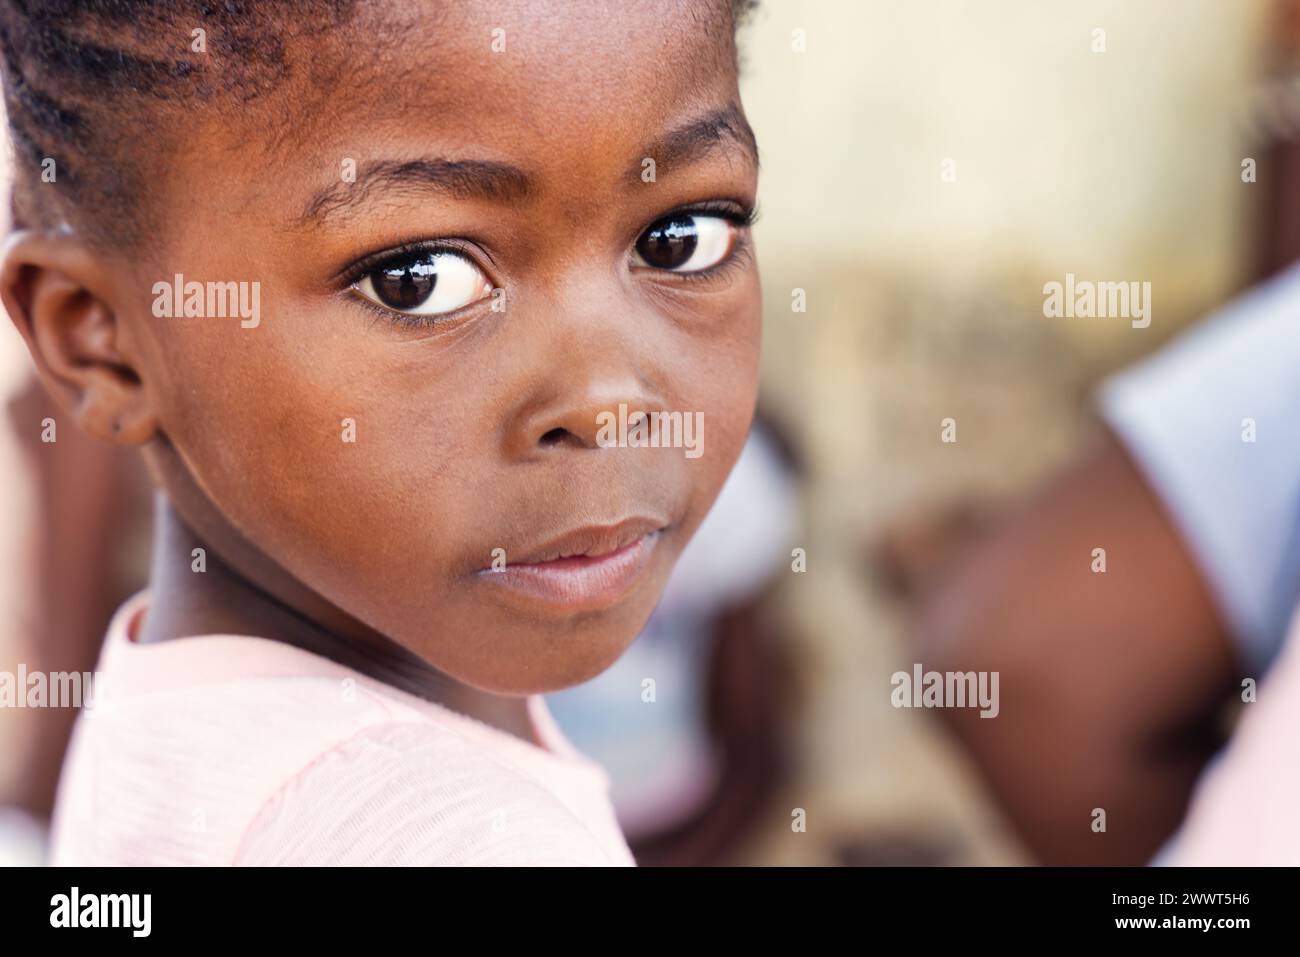 single young african girl with braids headshot, village life in a remote area Stock Photo